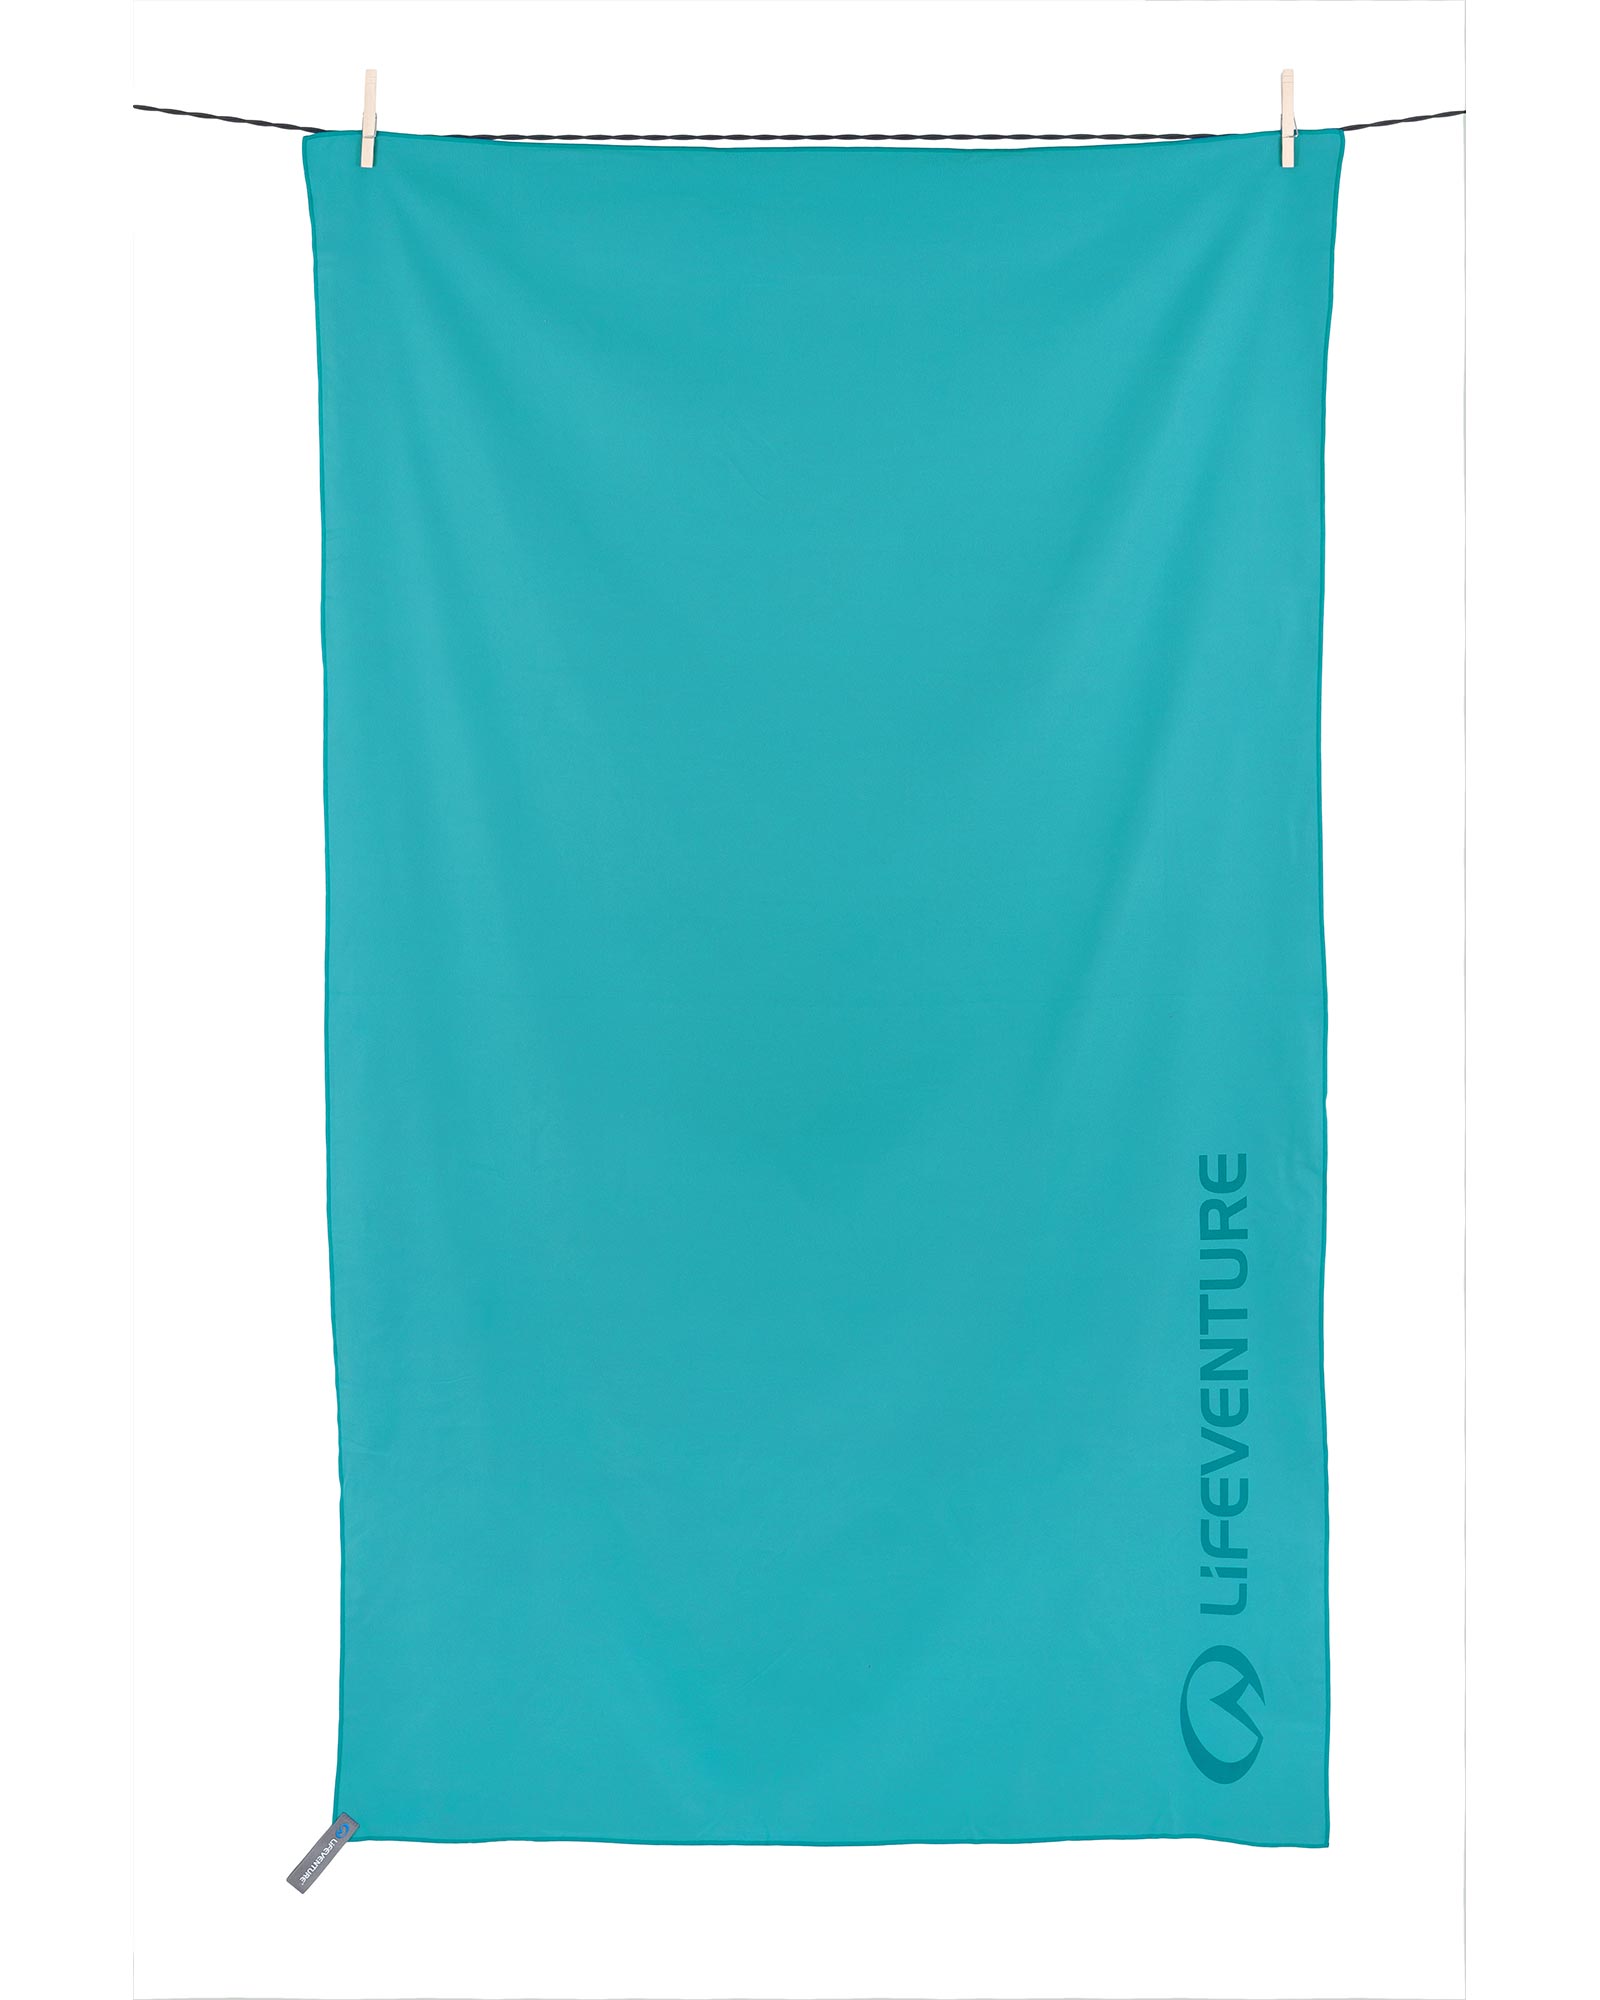 Product image of Lifeventure Recycled SoftFibre Trek Towel - Giant